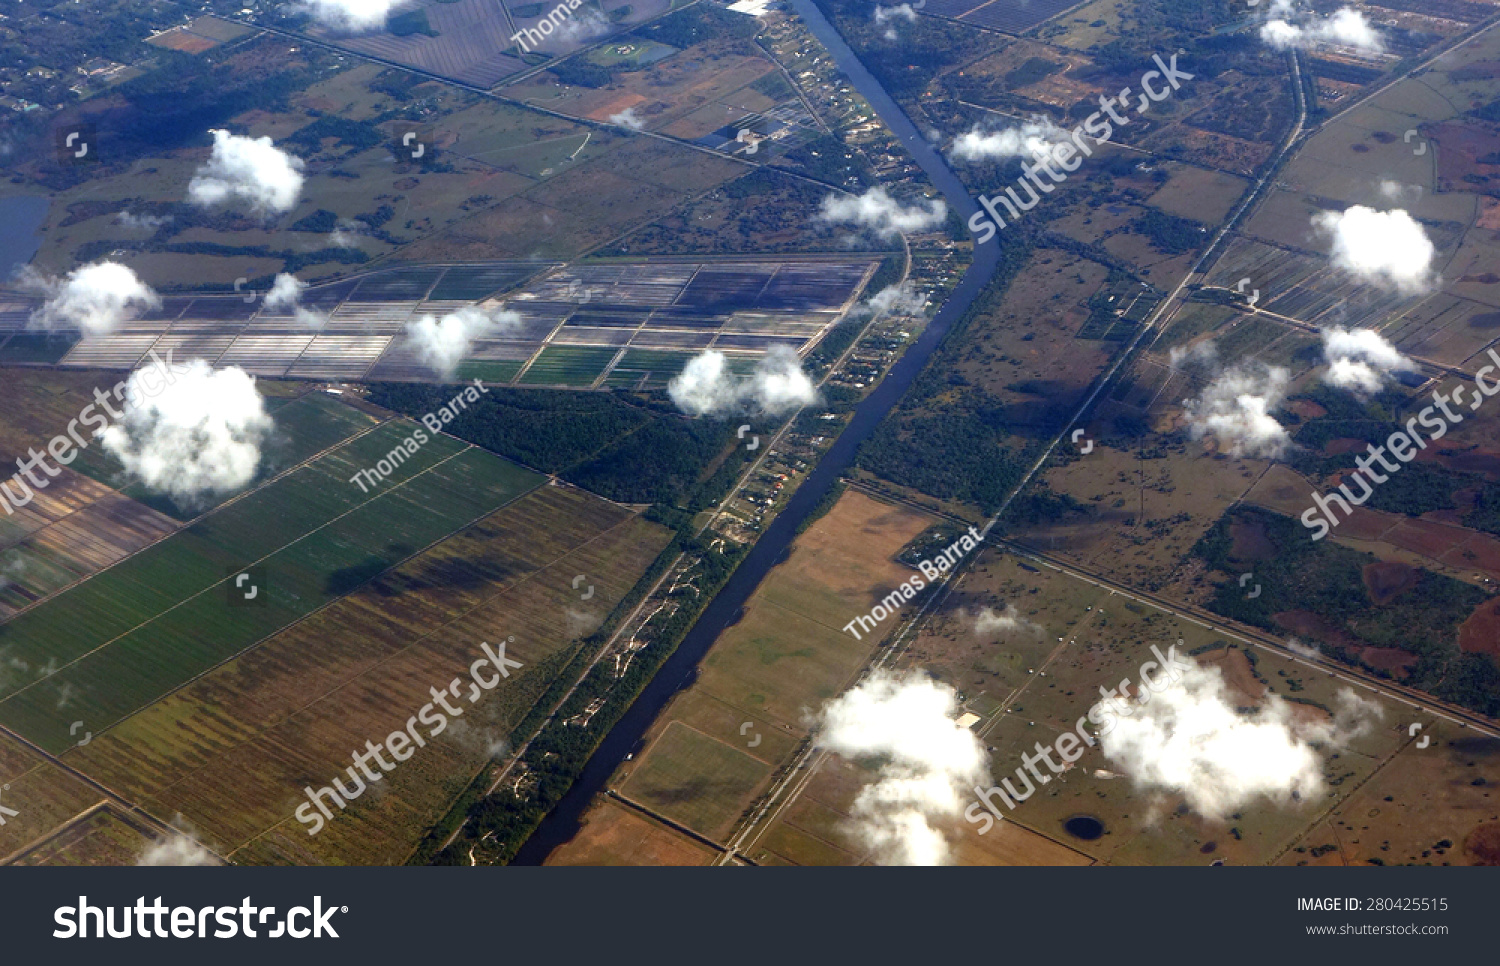 Stock Photo Aerial View Of The Kissimmee River Which Was Straightened By The Army Corps Of Engineers Which 280425515 